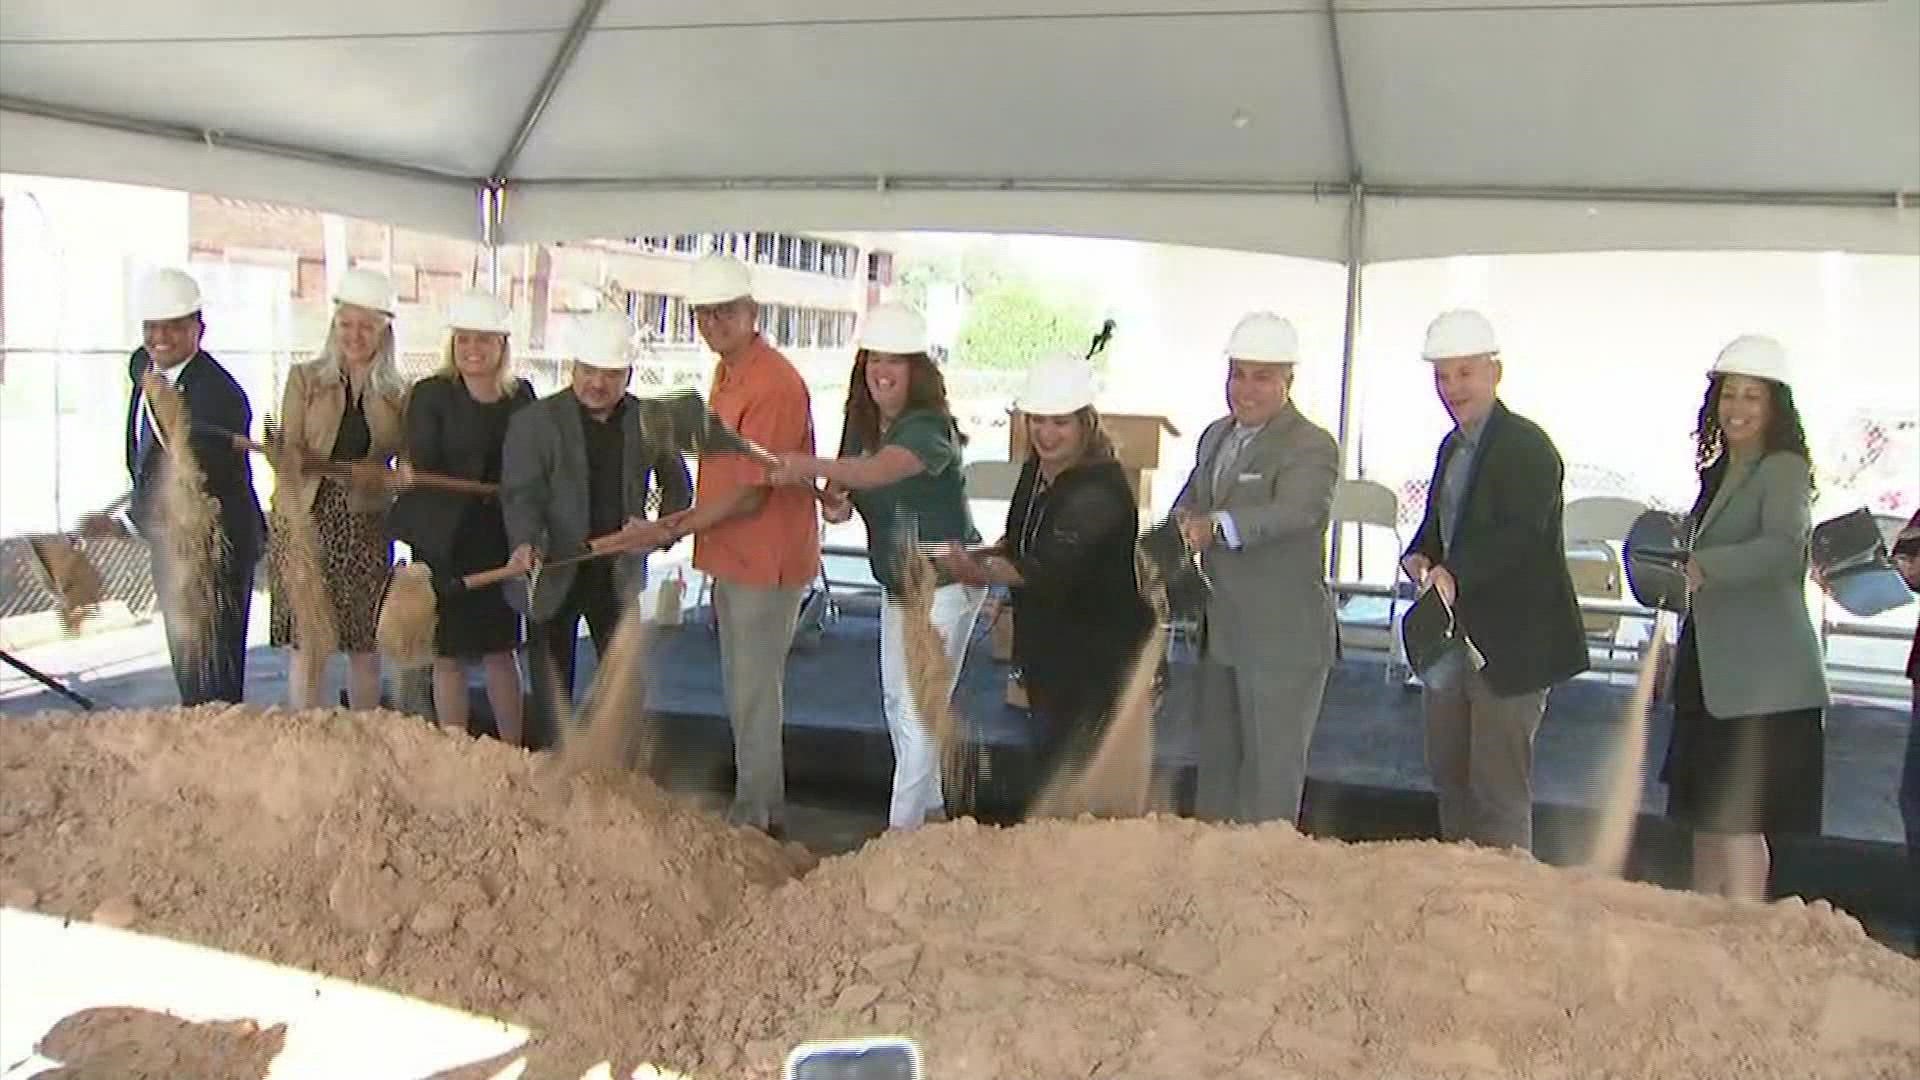 Sunrise Lofts, in Houston's East End, will provide housing for youths aging out of the foster care system.